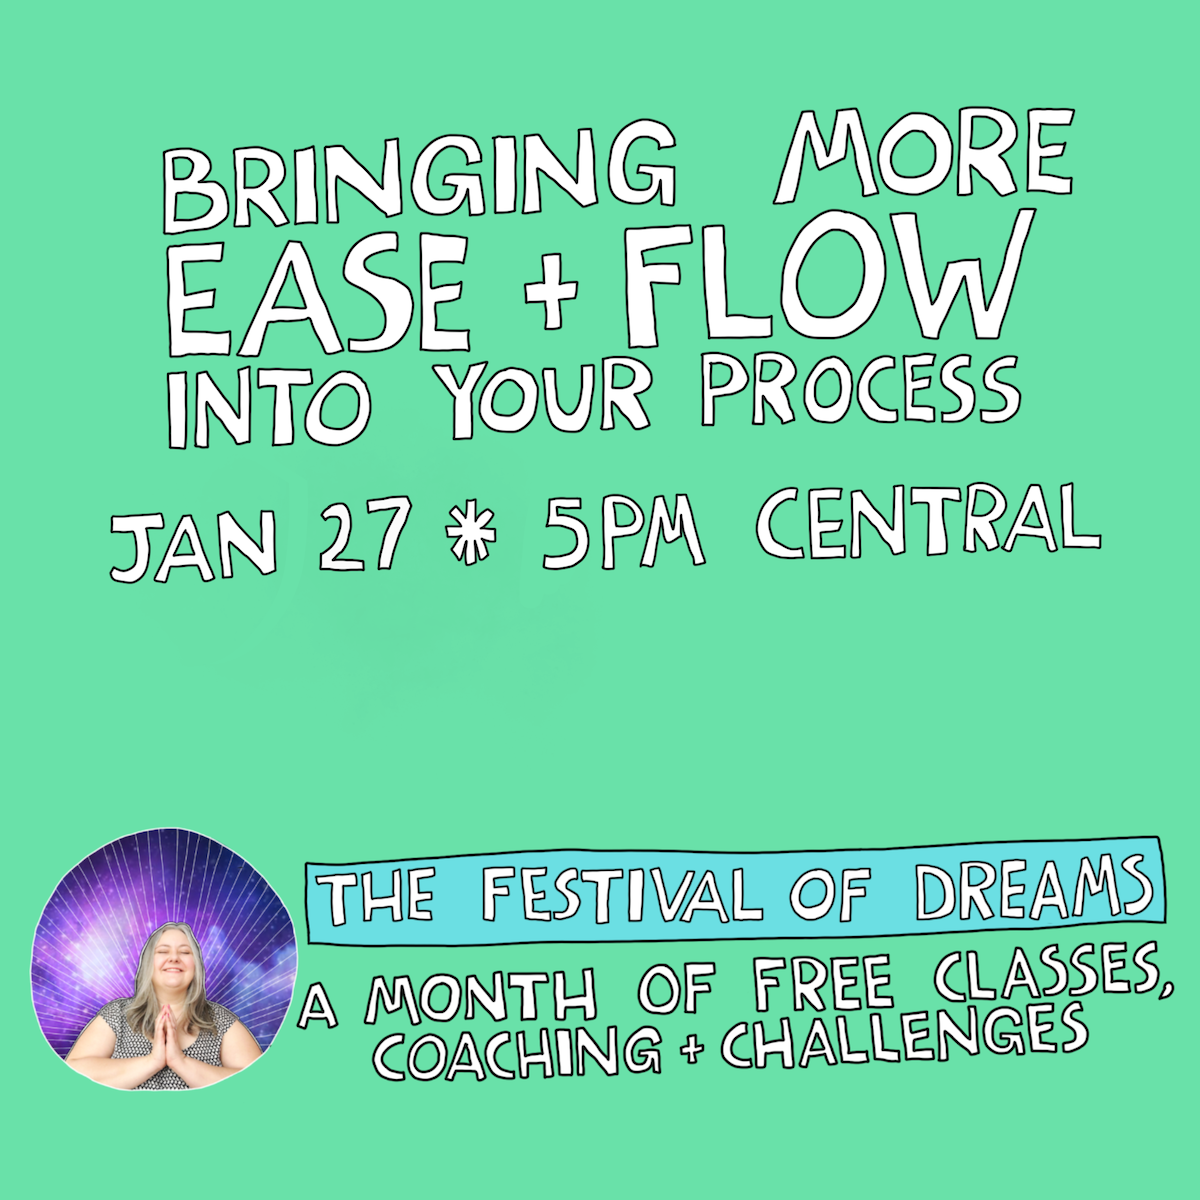 Bringing More EASE And FLOW Into Your Process